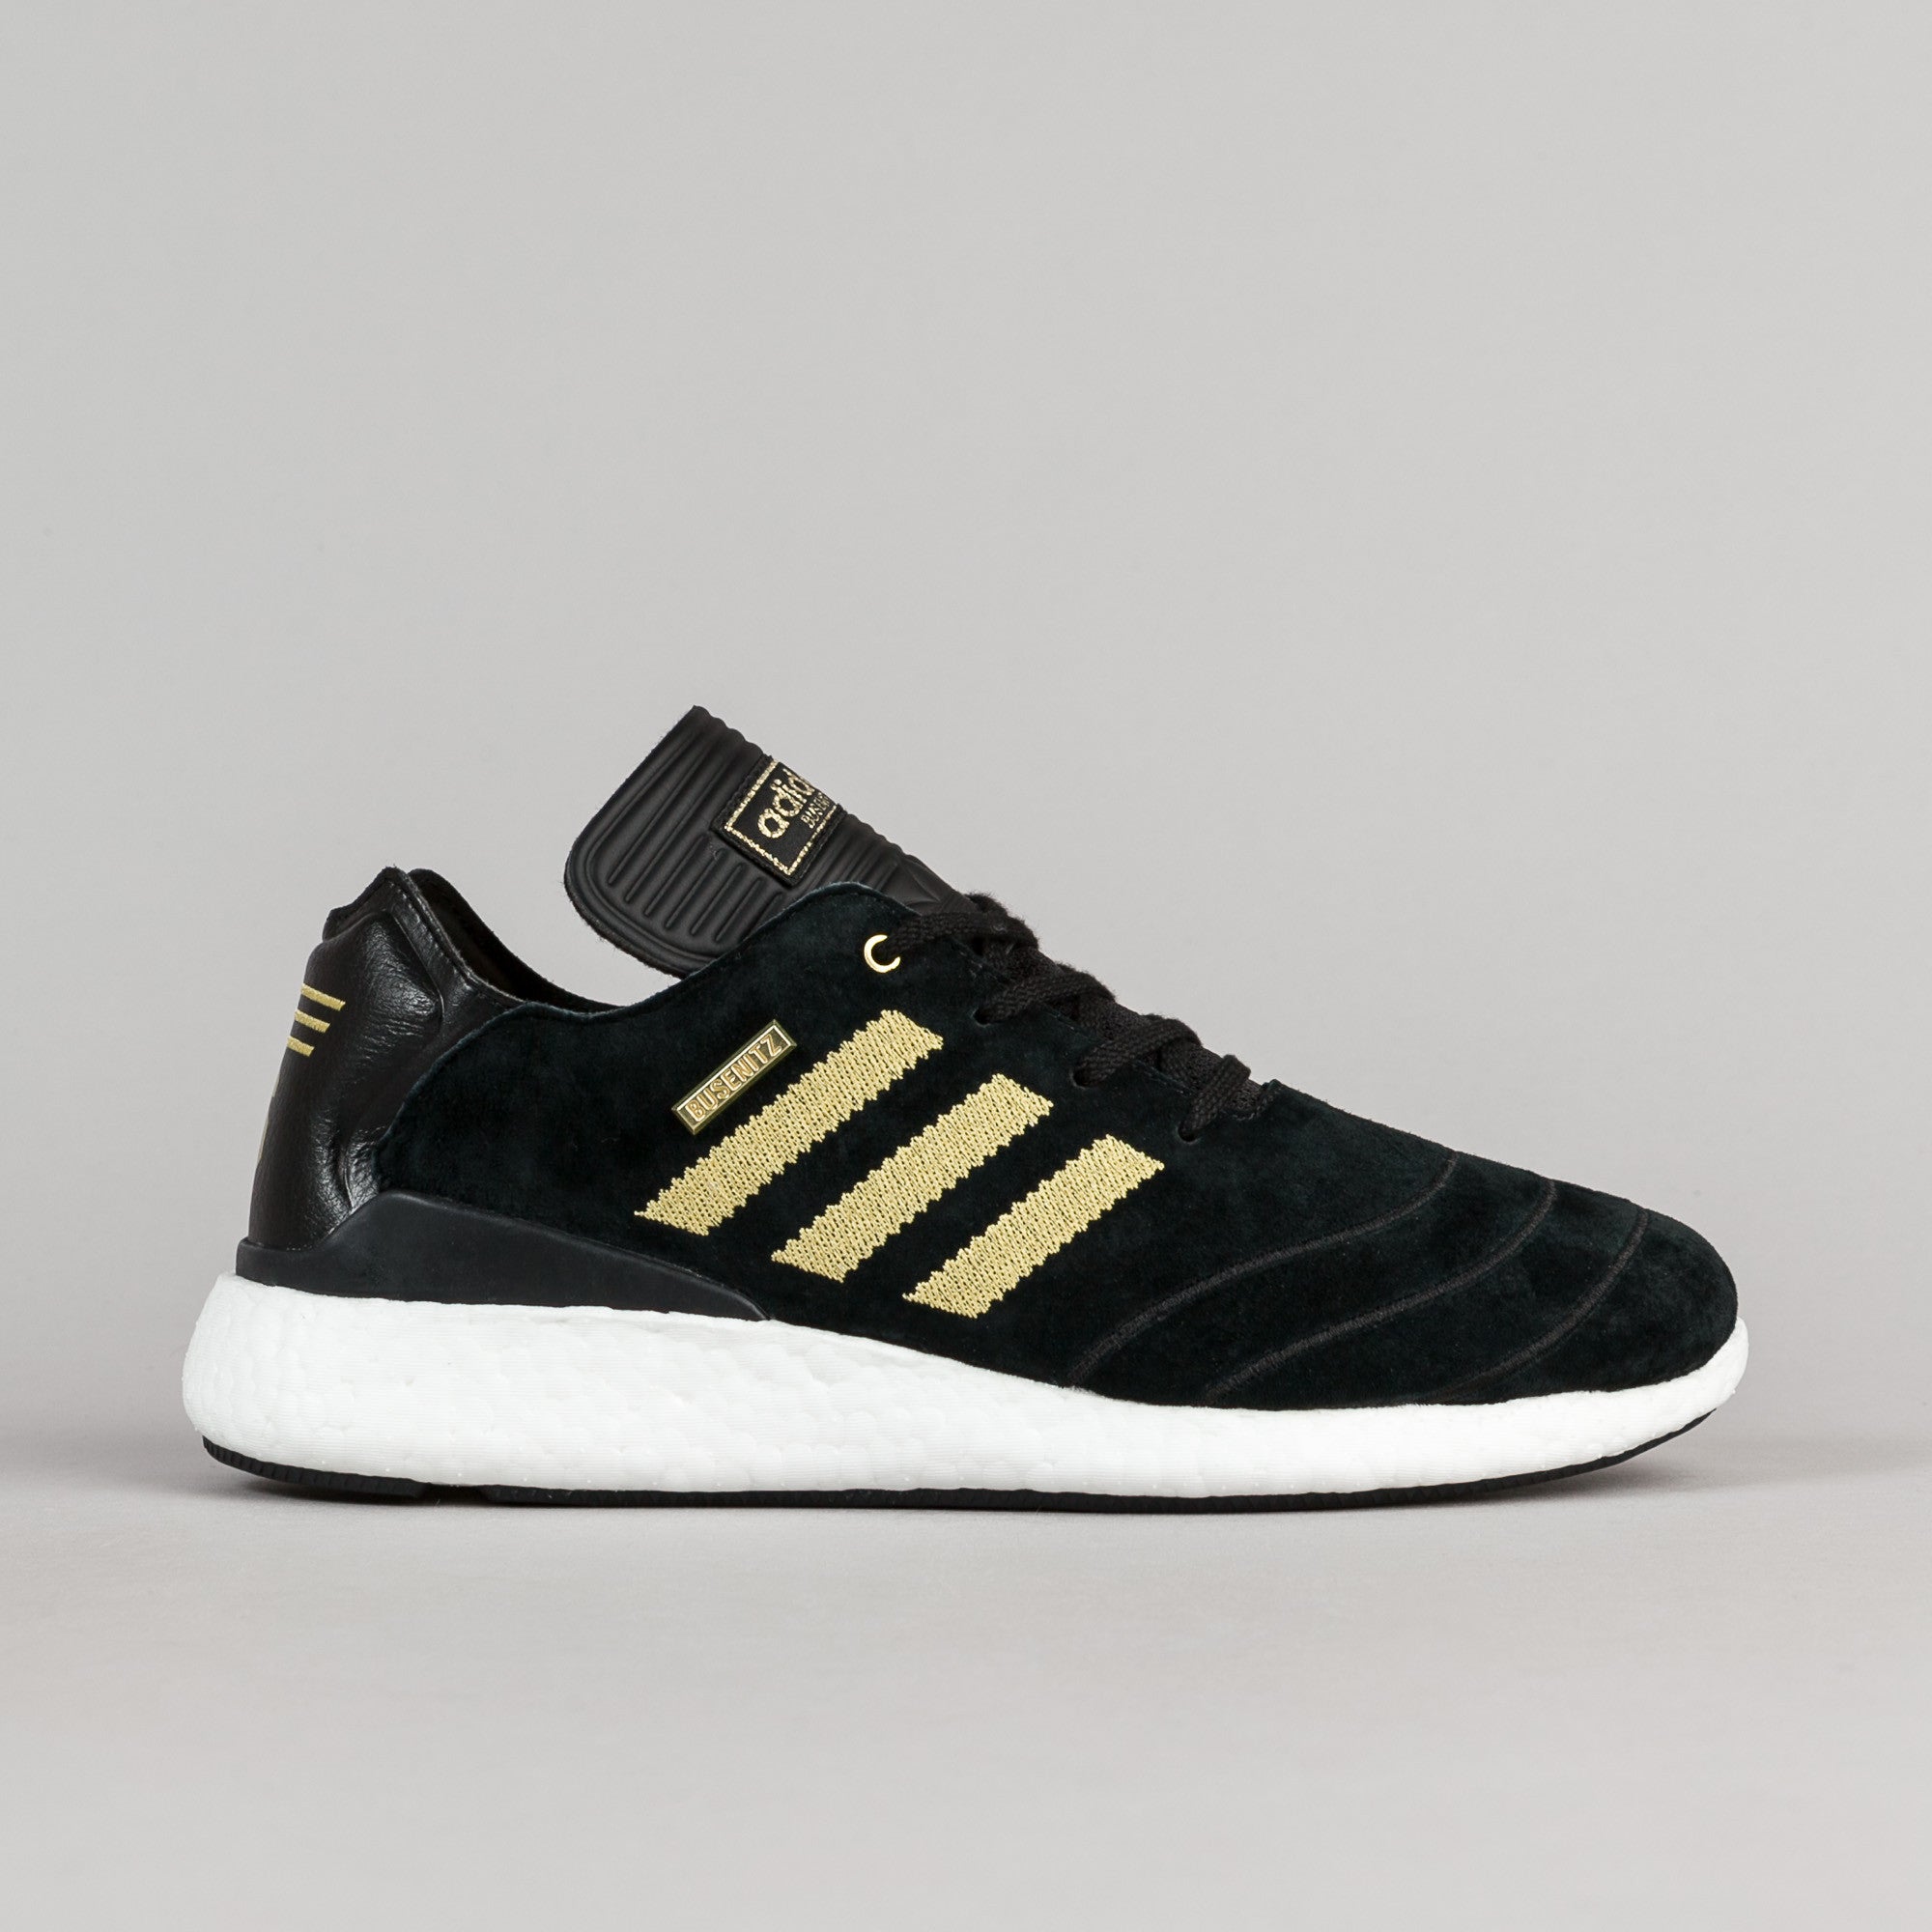 Adidas Busenitz Pure Boost 10 Year Anniversary Shoes - Core Black / Me ...